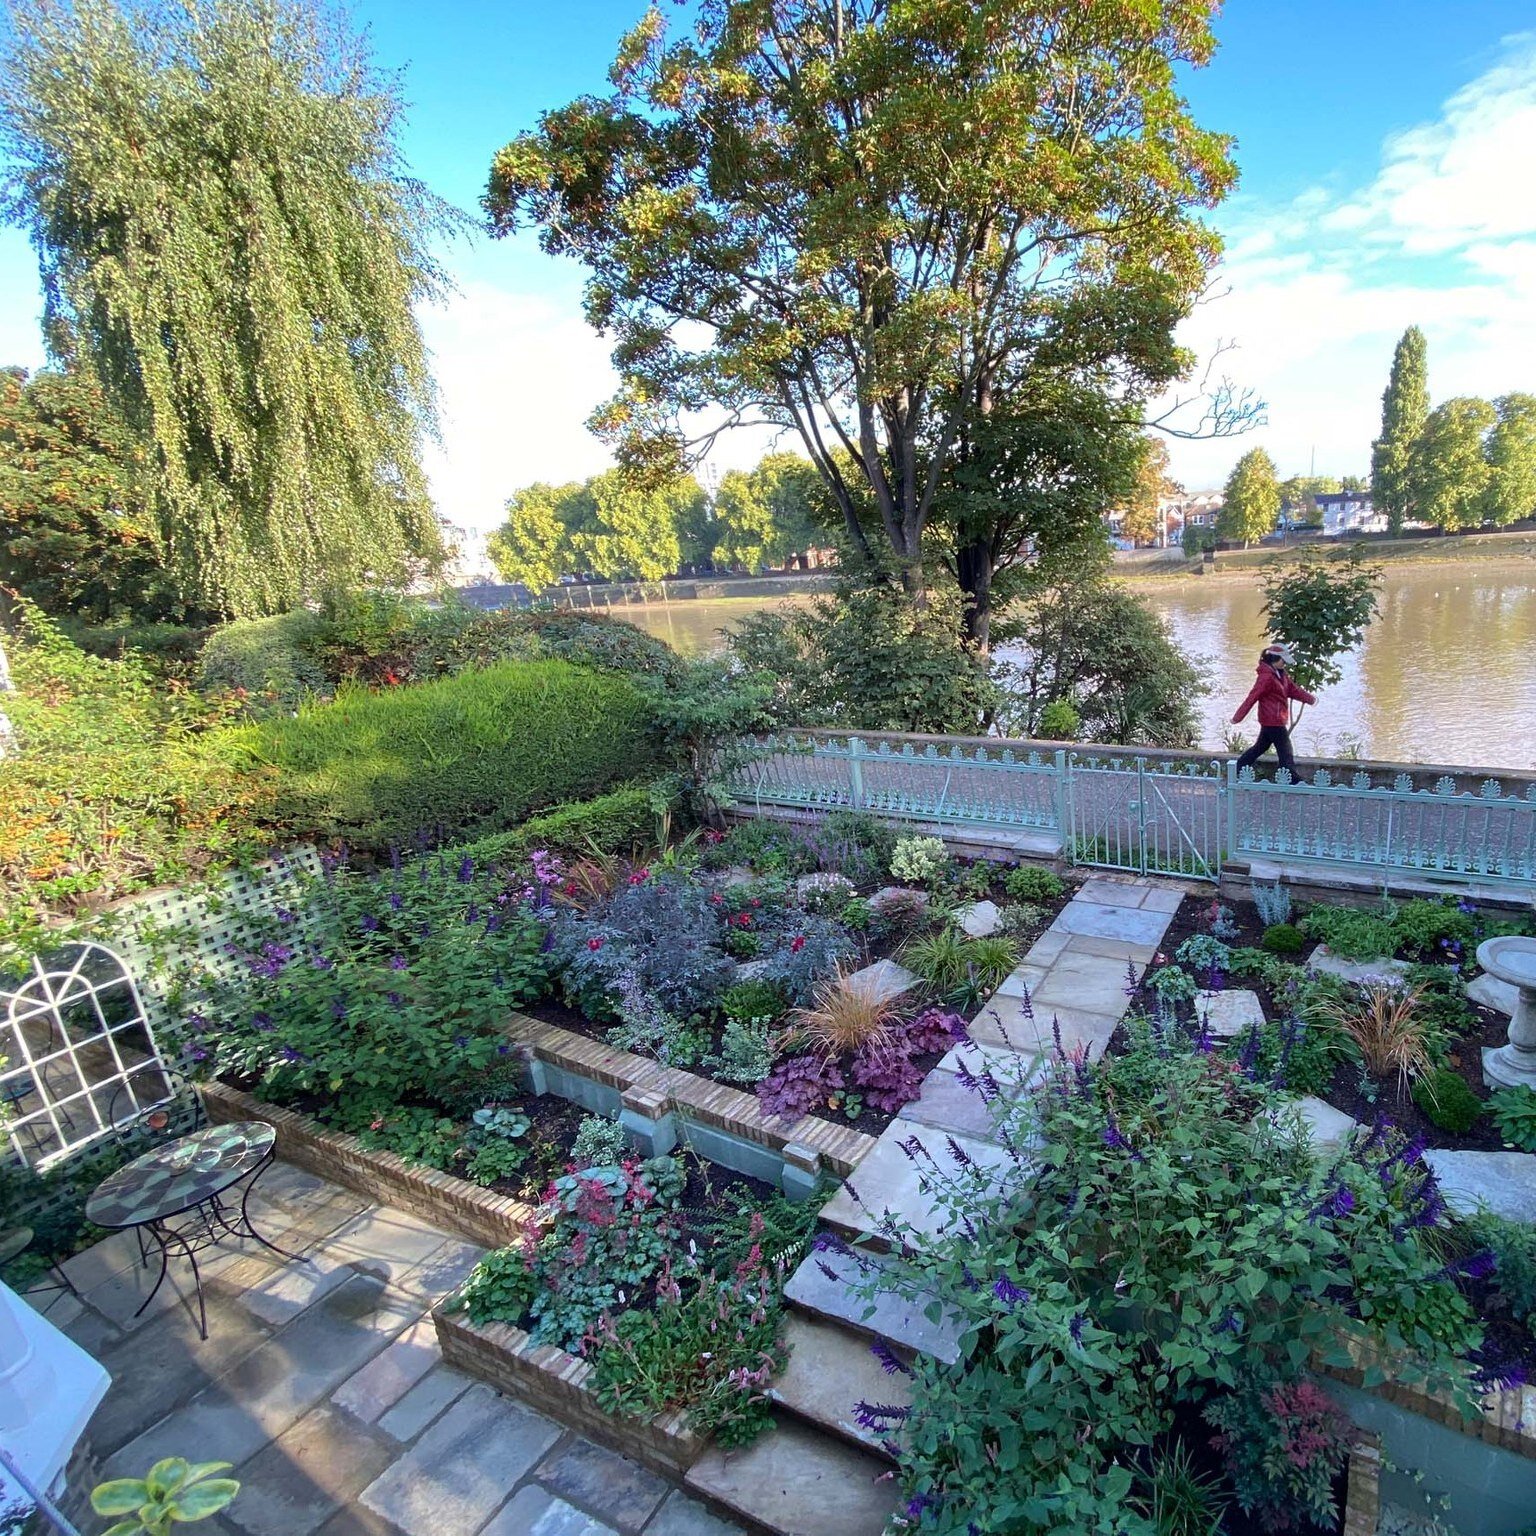 I always love walking past this gorgeous Kew cottage garden by the Thames towpath which I designed last year. My clients asked for exuberant planting, which works so well in this wonderful setting! Many thanks to @positivegardenltd for the excellent 